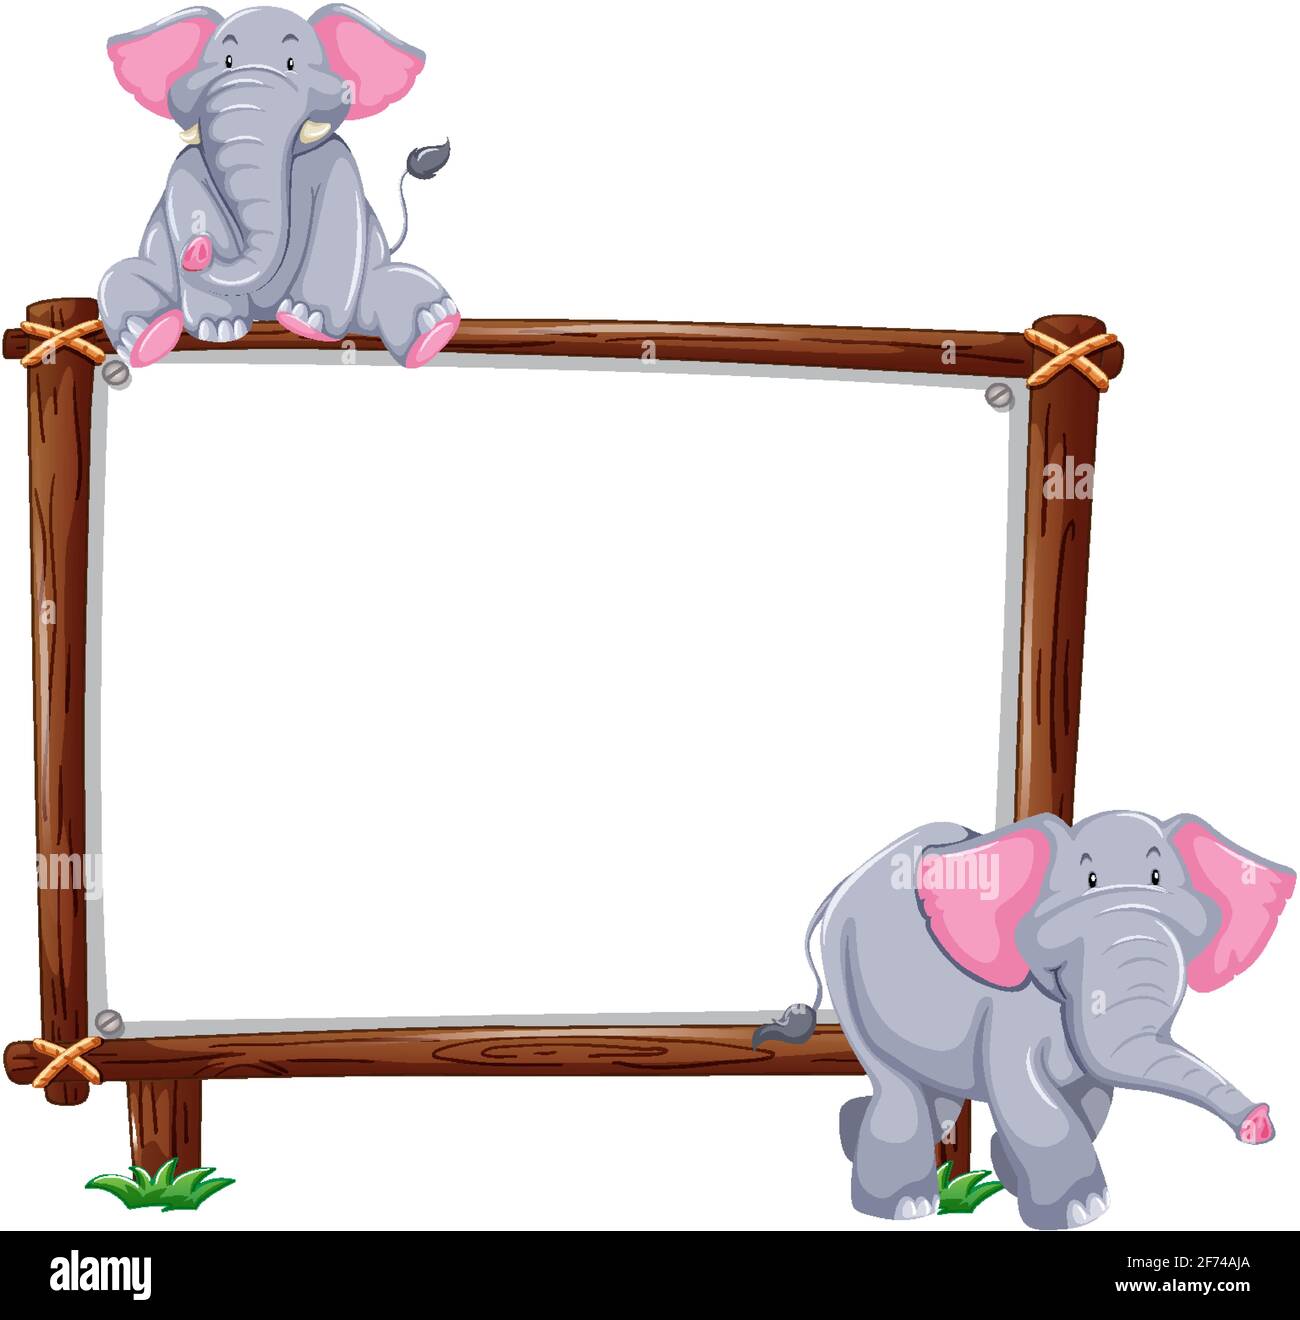 Empty banner with two elephants on white background illustration Stock Vector